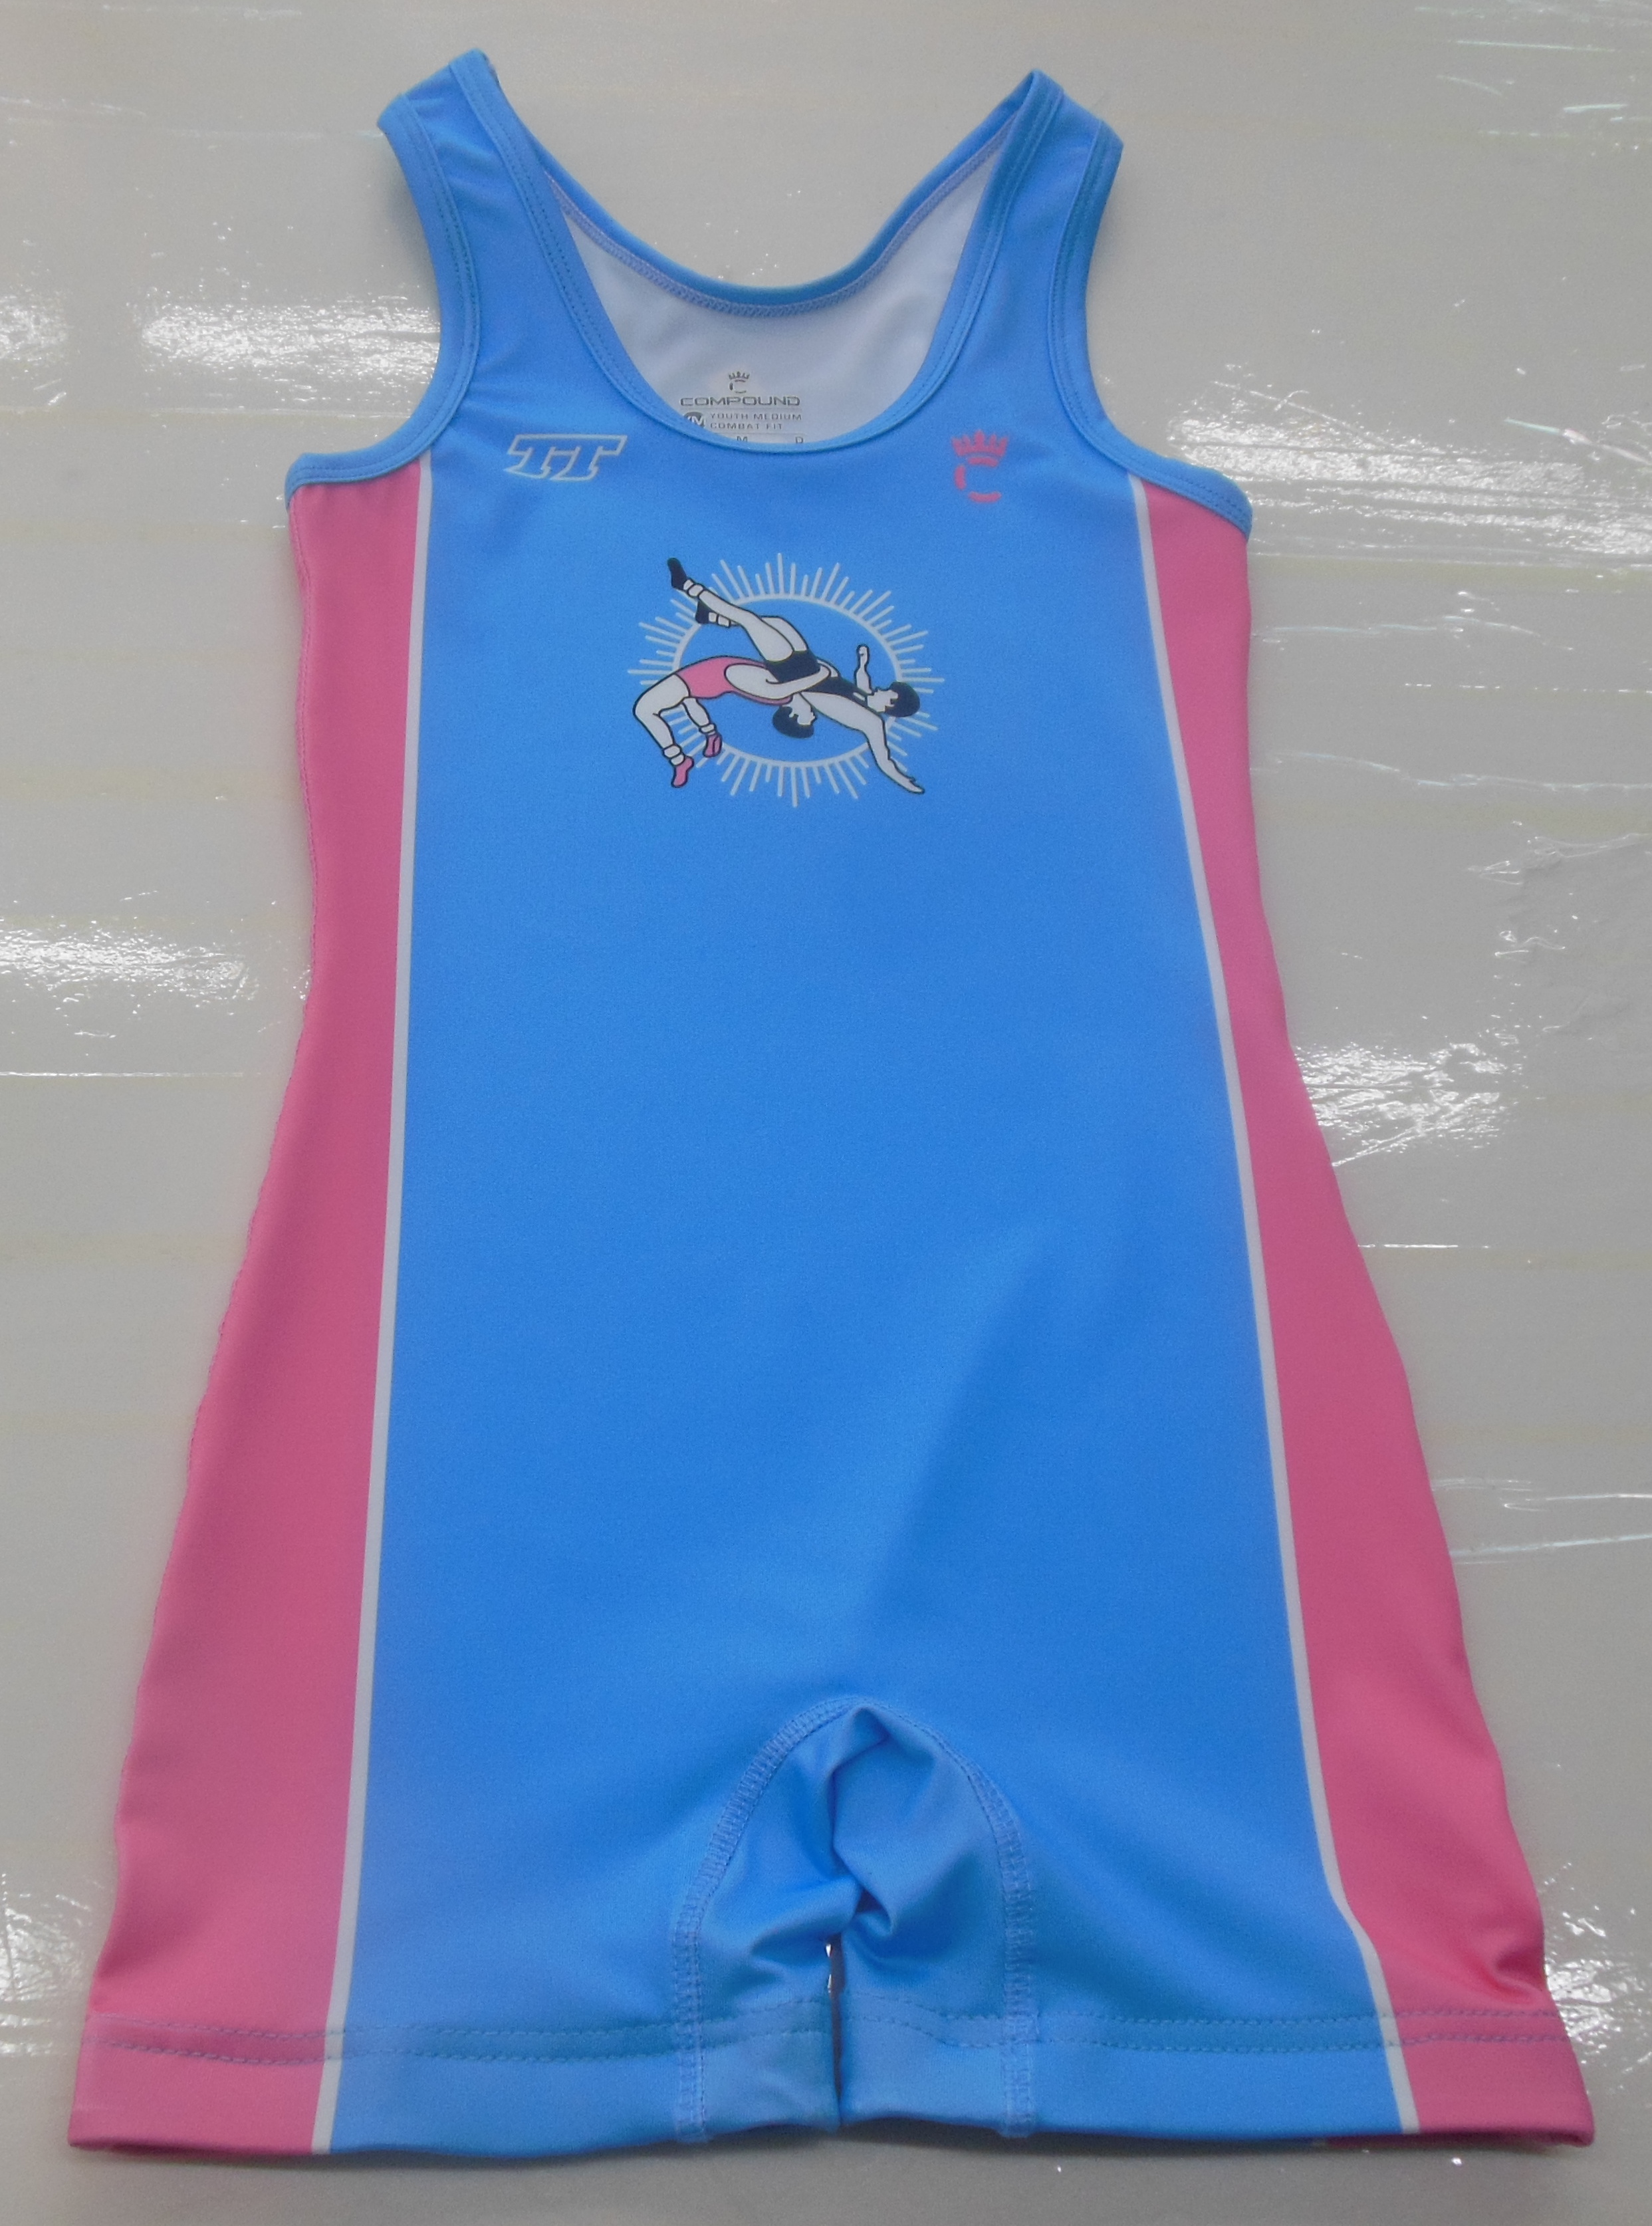 Red Blue Black and White Baseball Uniforms, Kids Swimming Suits